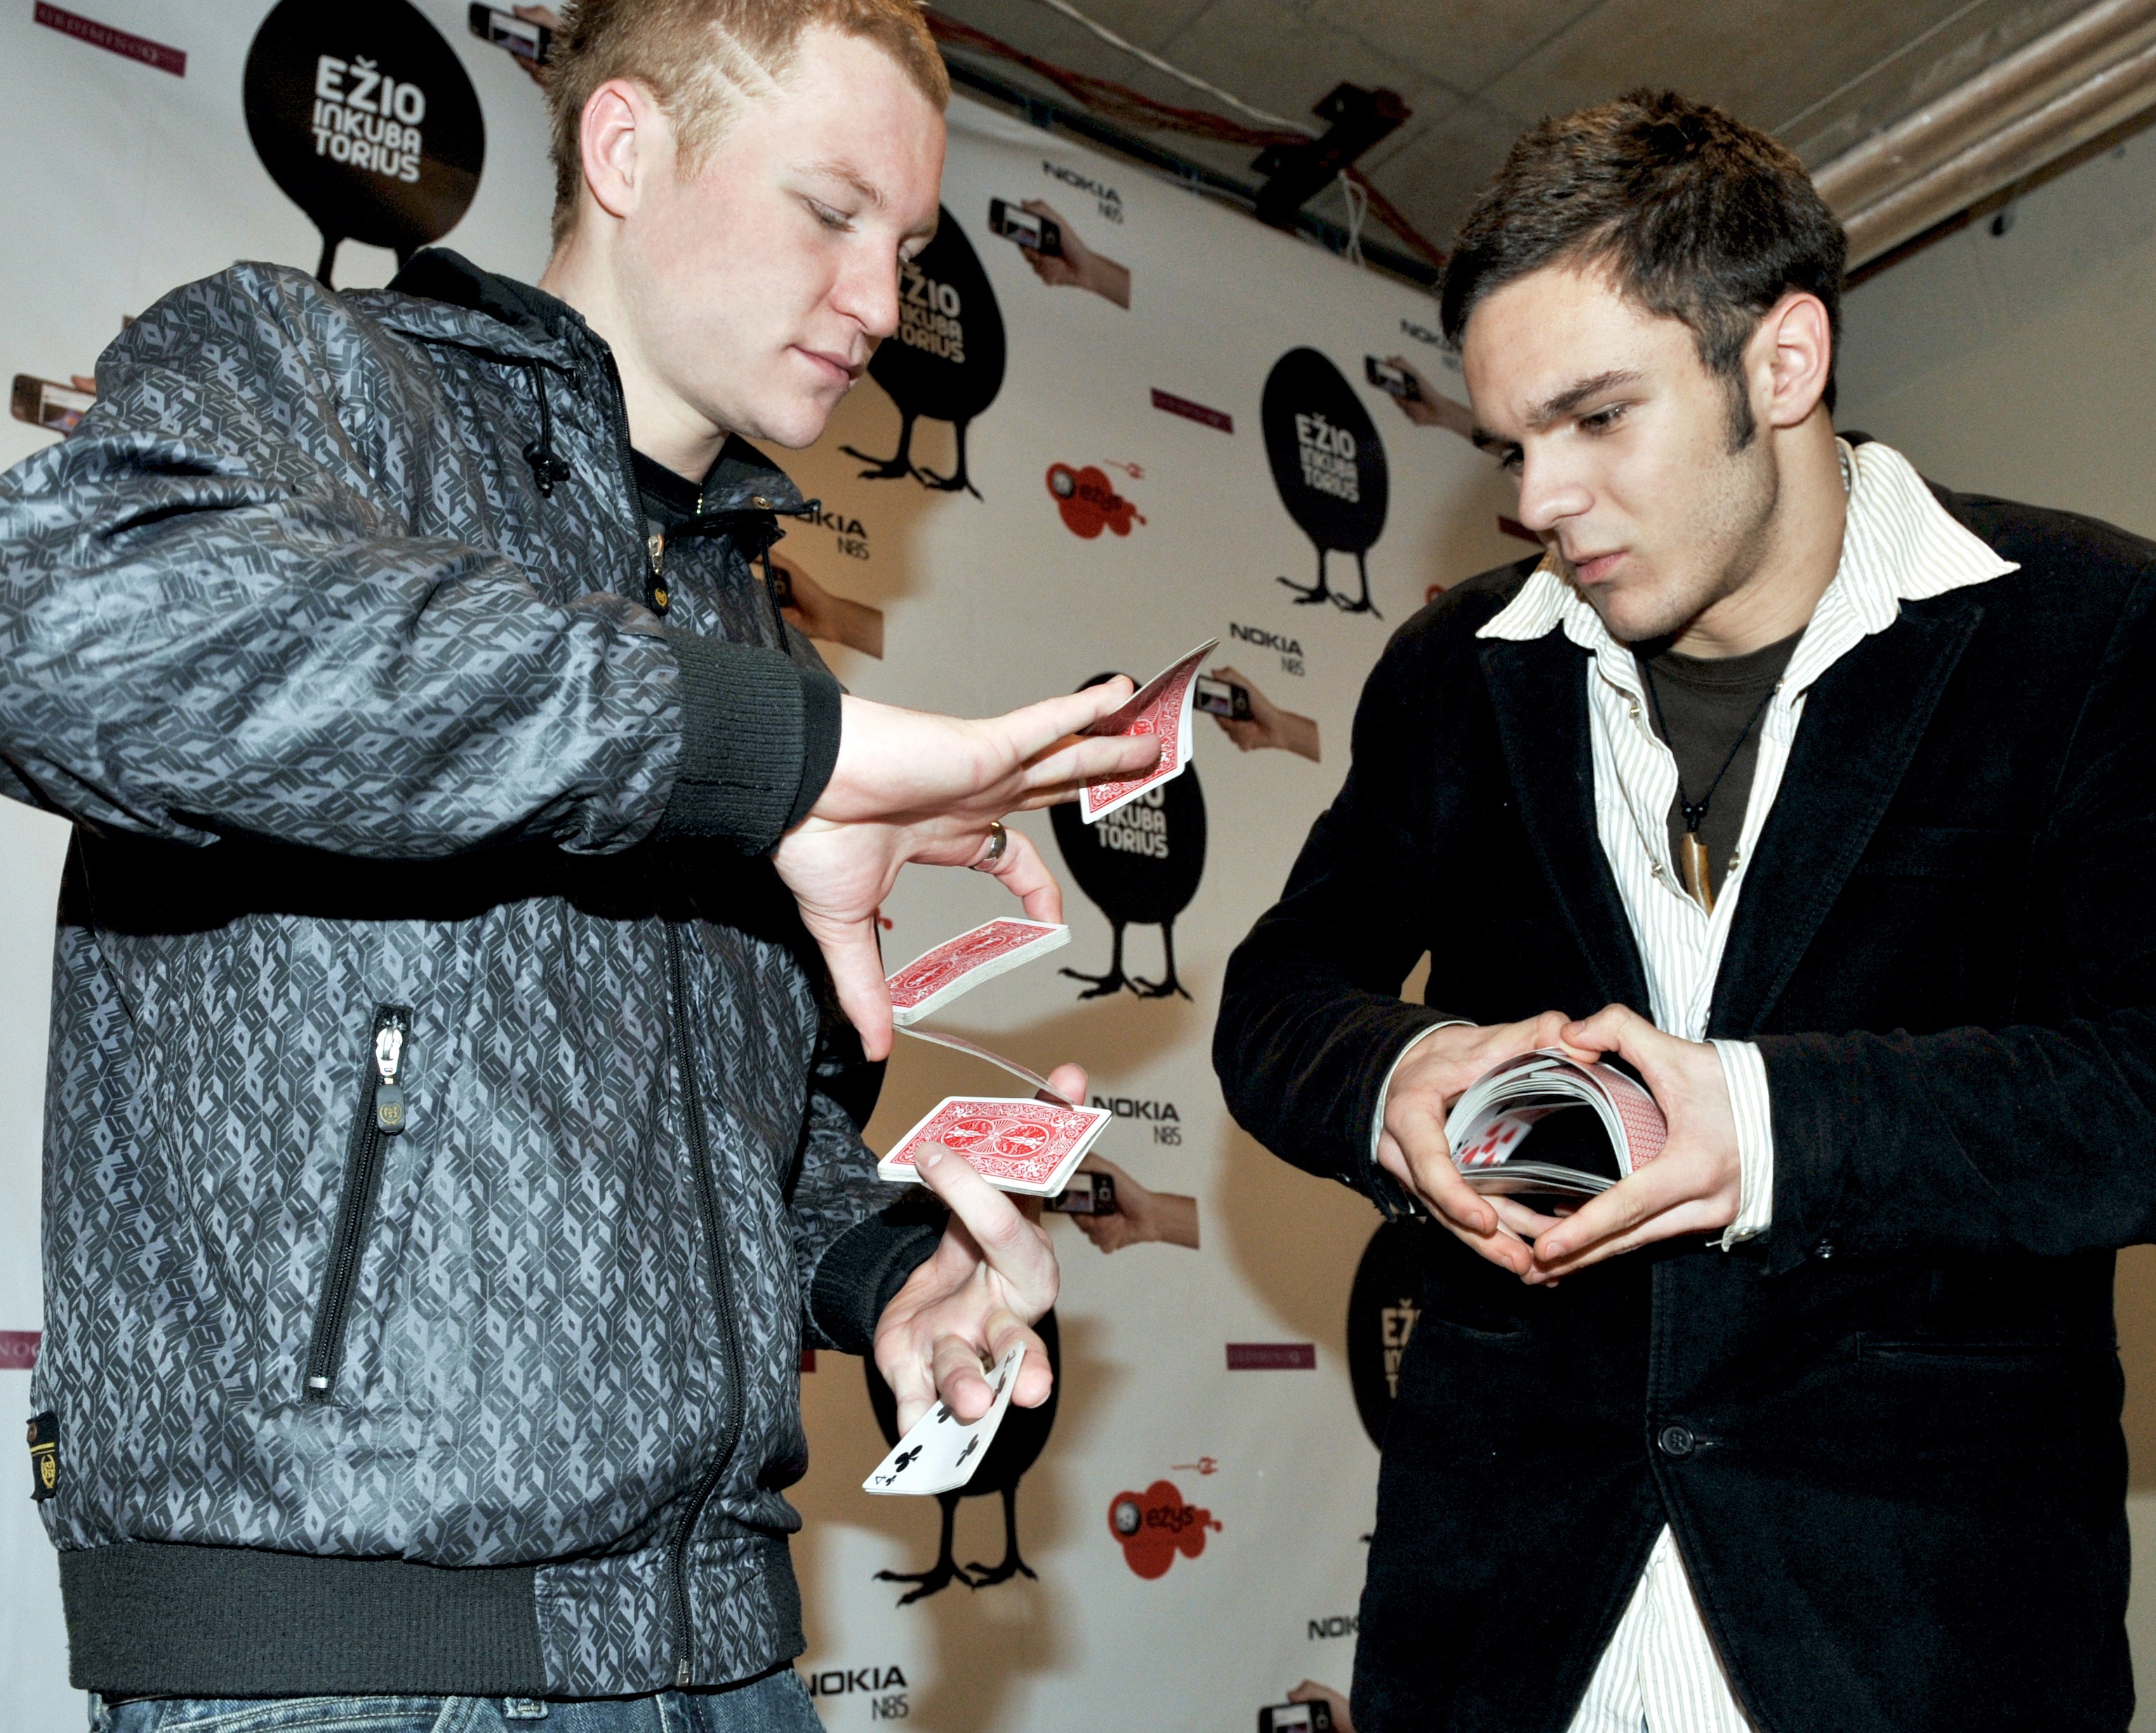 Street Magician Liam Walsh teaching close up magic for MTV and Ezio Inkubatorious in Lithuania